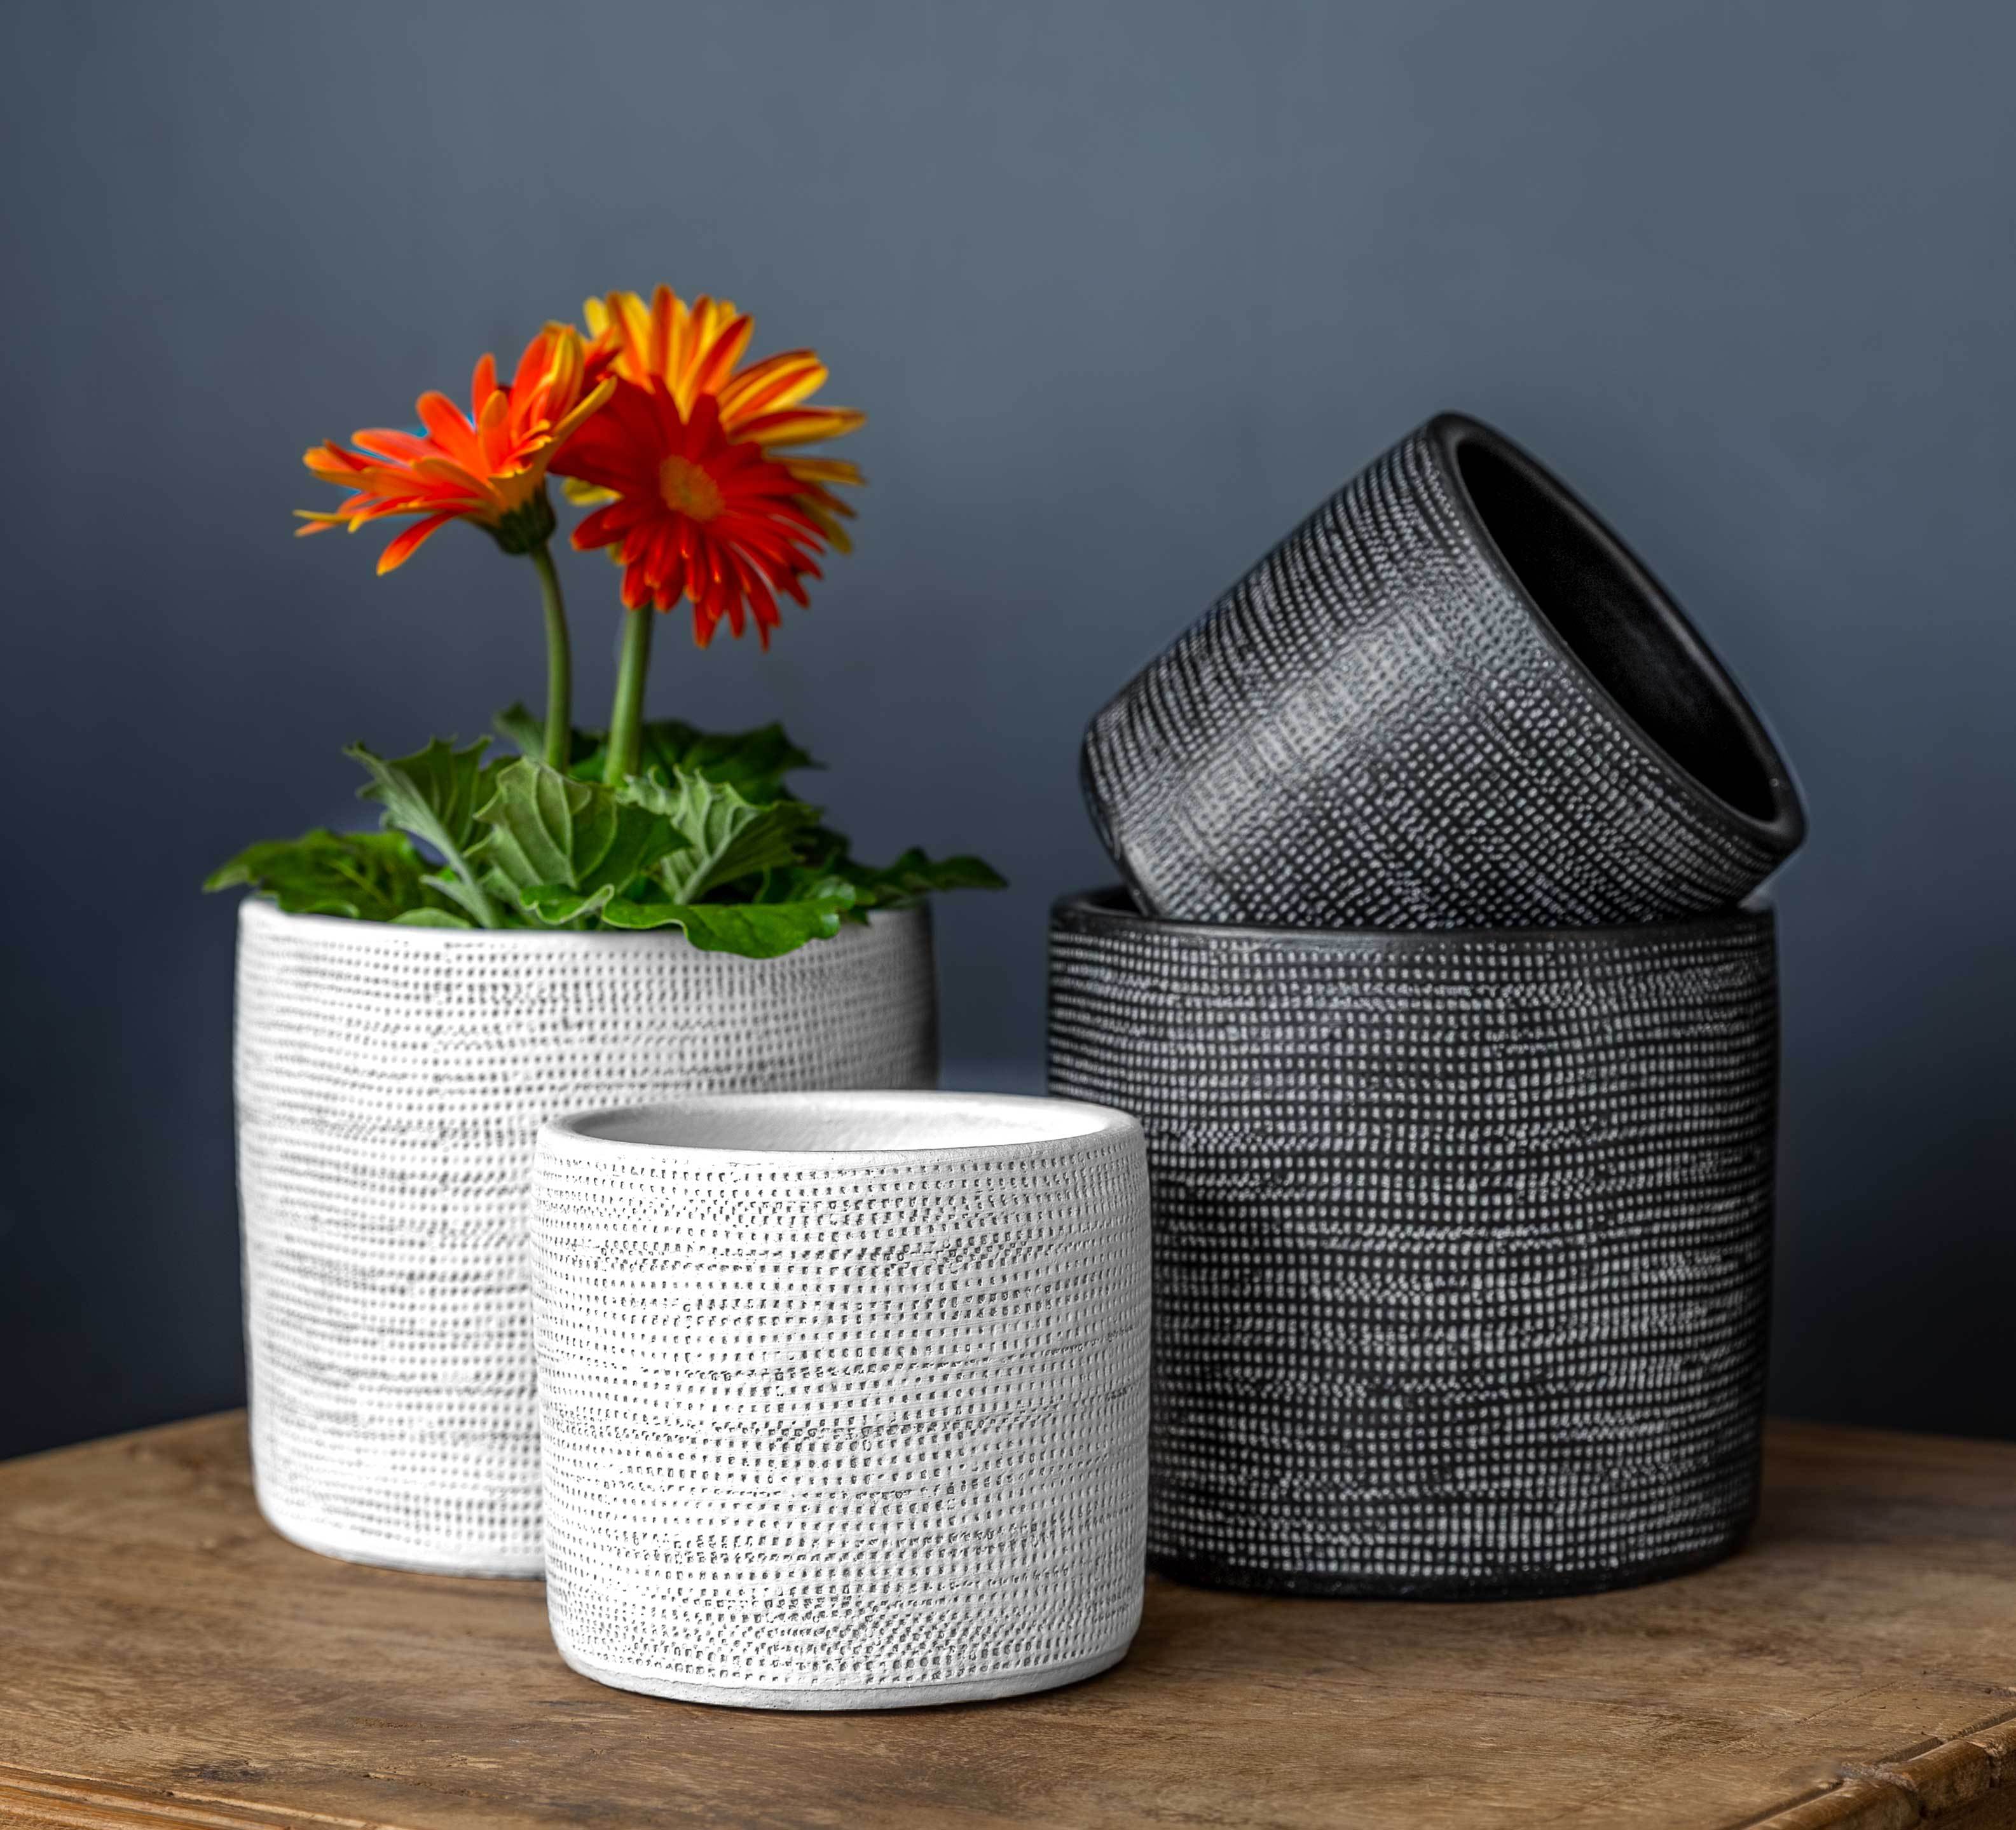 Photo of Campania Linen Weave Cylinder - Black and White Mix - Set of 8 - Exclusively Campania